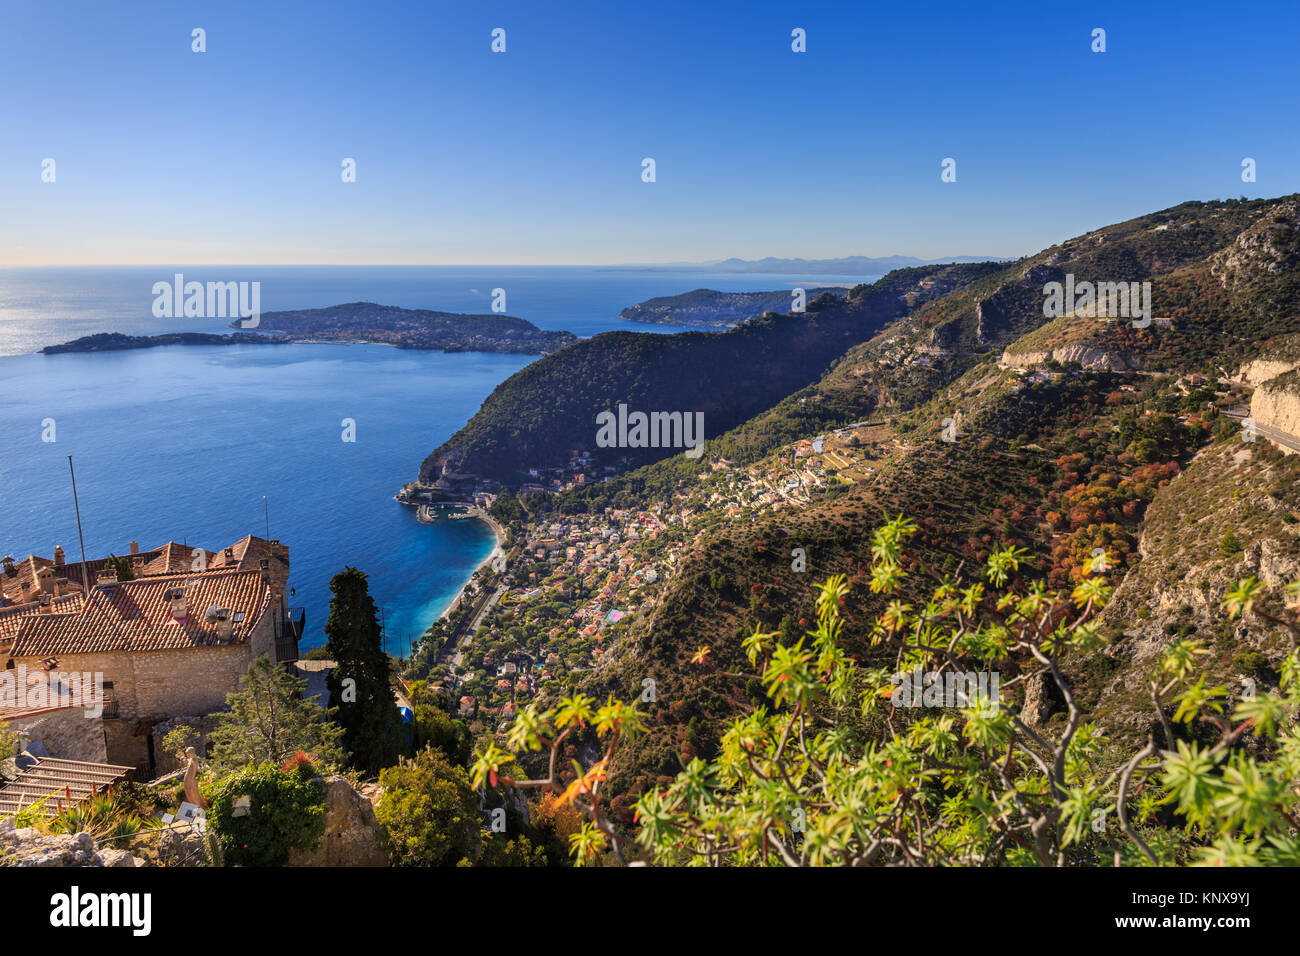 View from Eze across Cap Ferrat and the French Riviera towards the Mediterranean Sea, Cote d'Azur, France Stock Photo